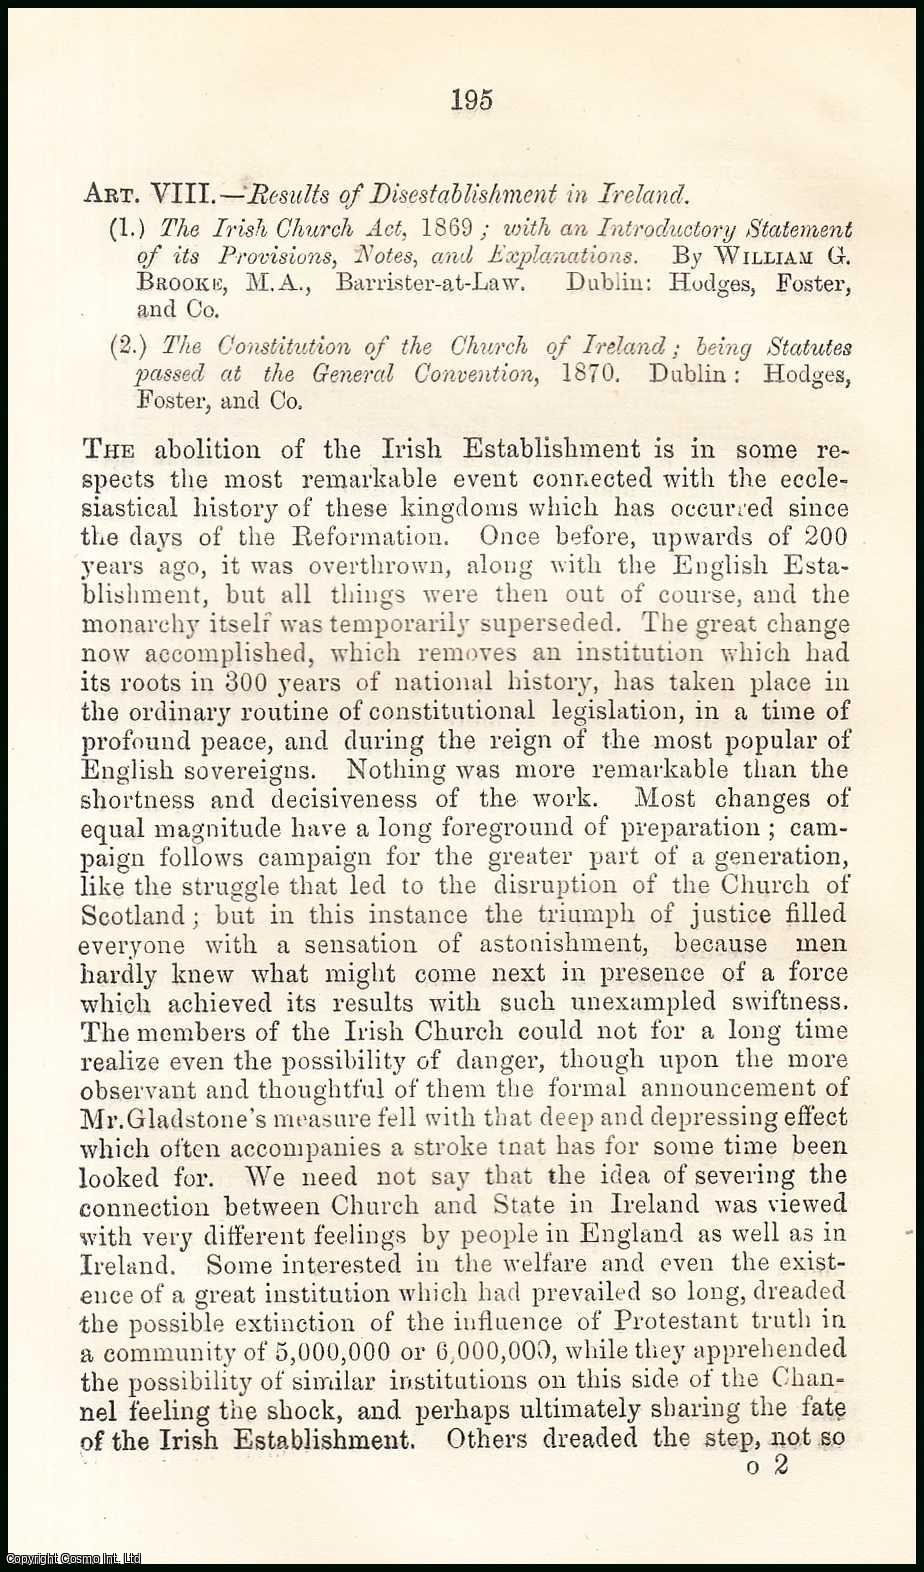 Author Unknown - Results of Disestablishment in Ireland. A rare original article from the British Quarterly Review, 1872.